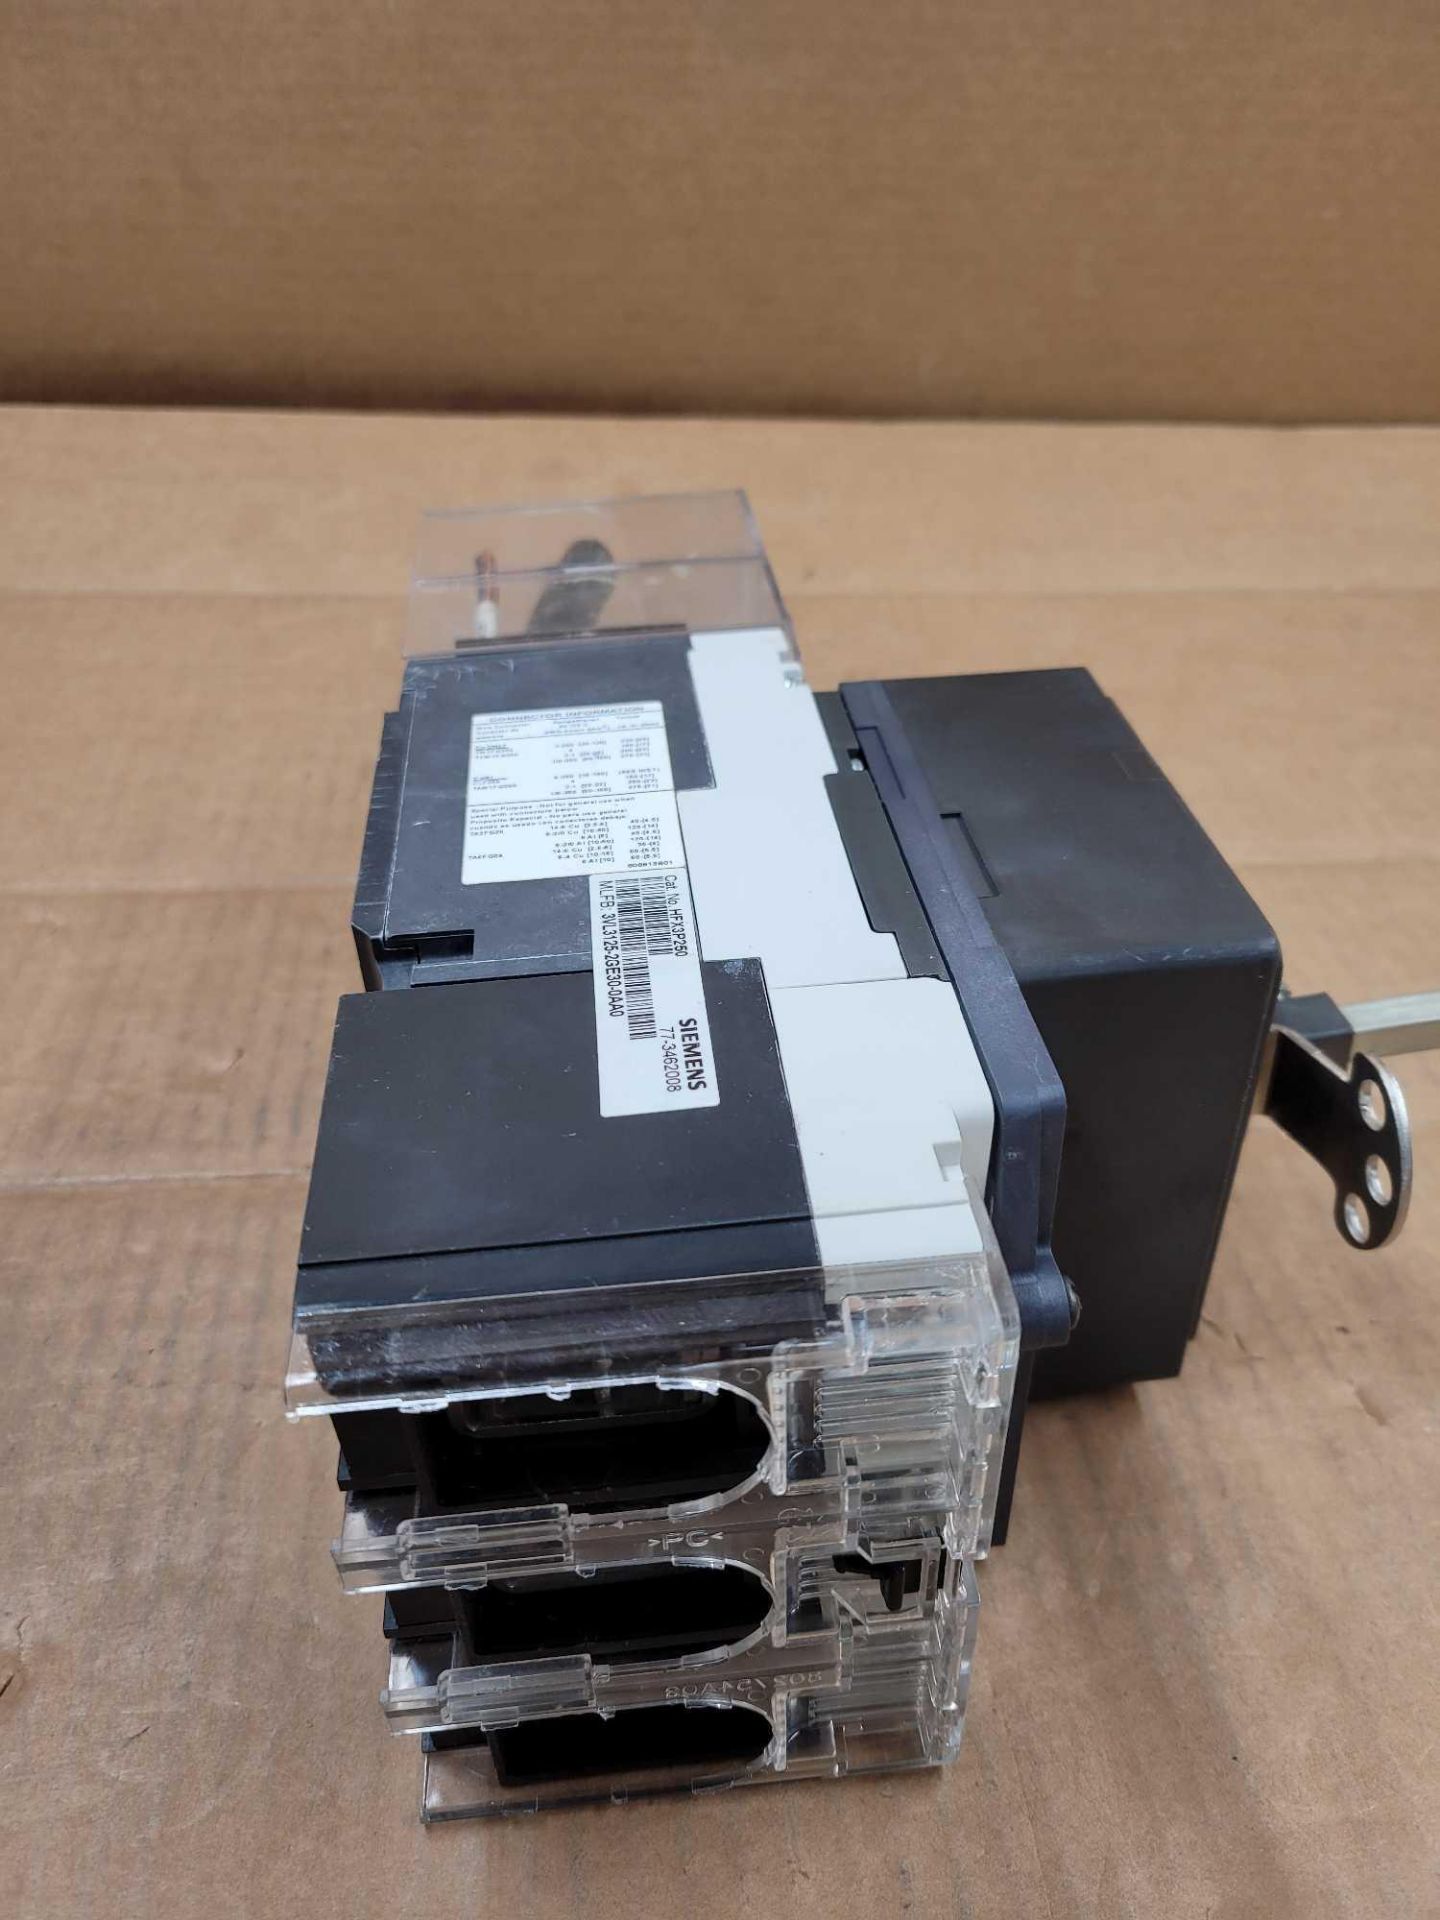 LOT OF 2 SIEMENS / (1) SIEMENS HFX3P250 with 3VL9300-3HF01 and 8UC9400 ; 250 Amp Circuit Breaker wit - Image 7 of 22